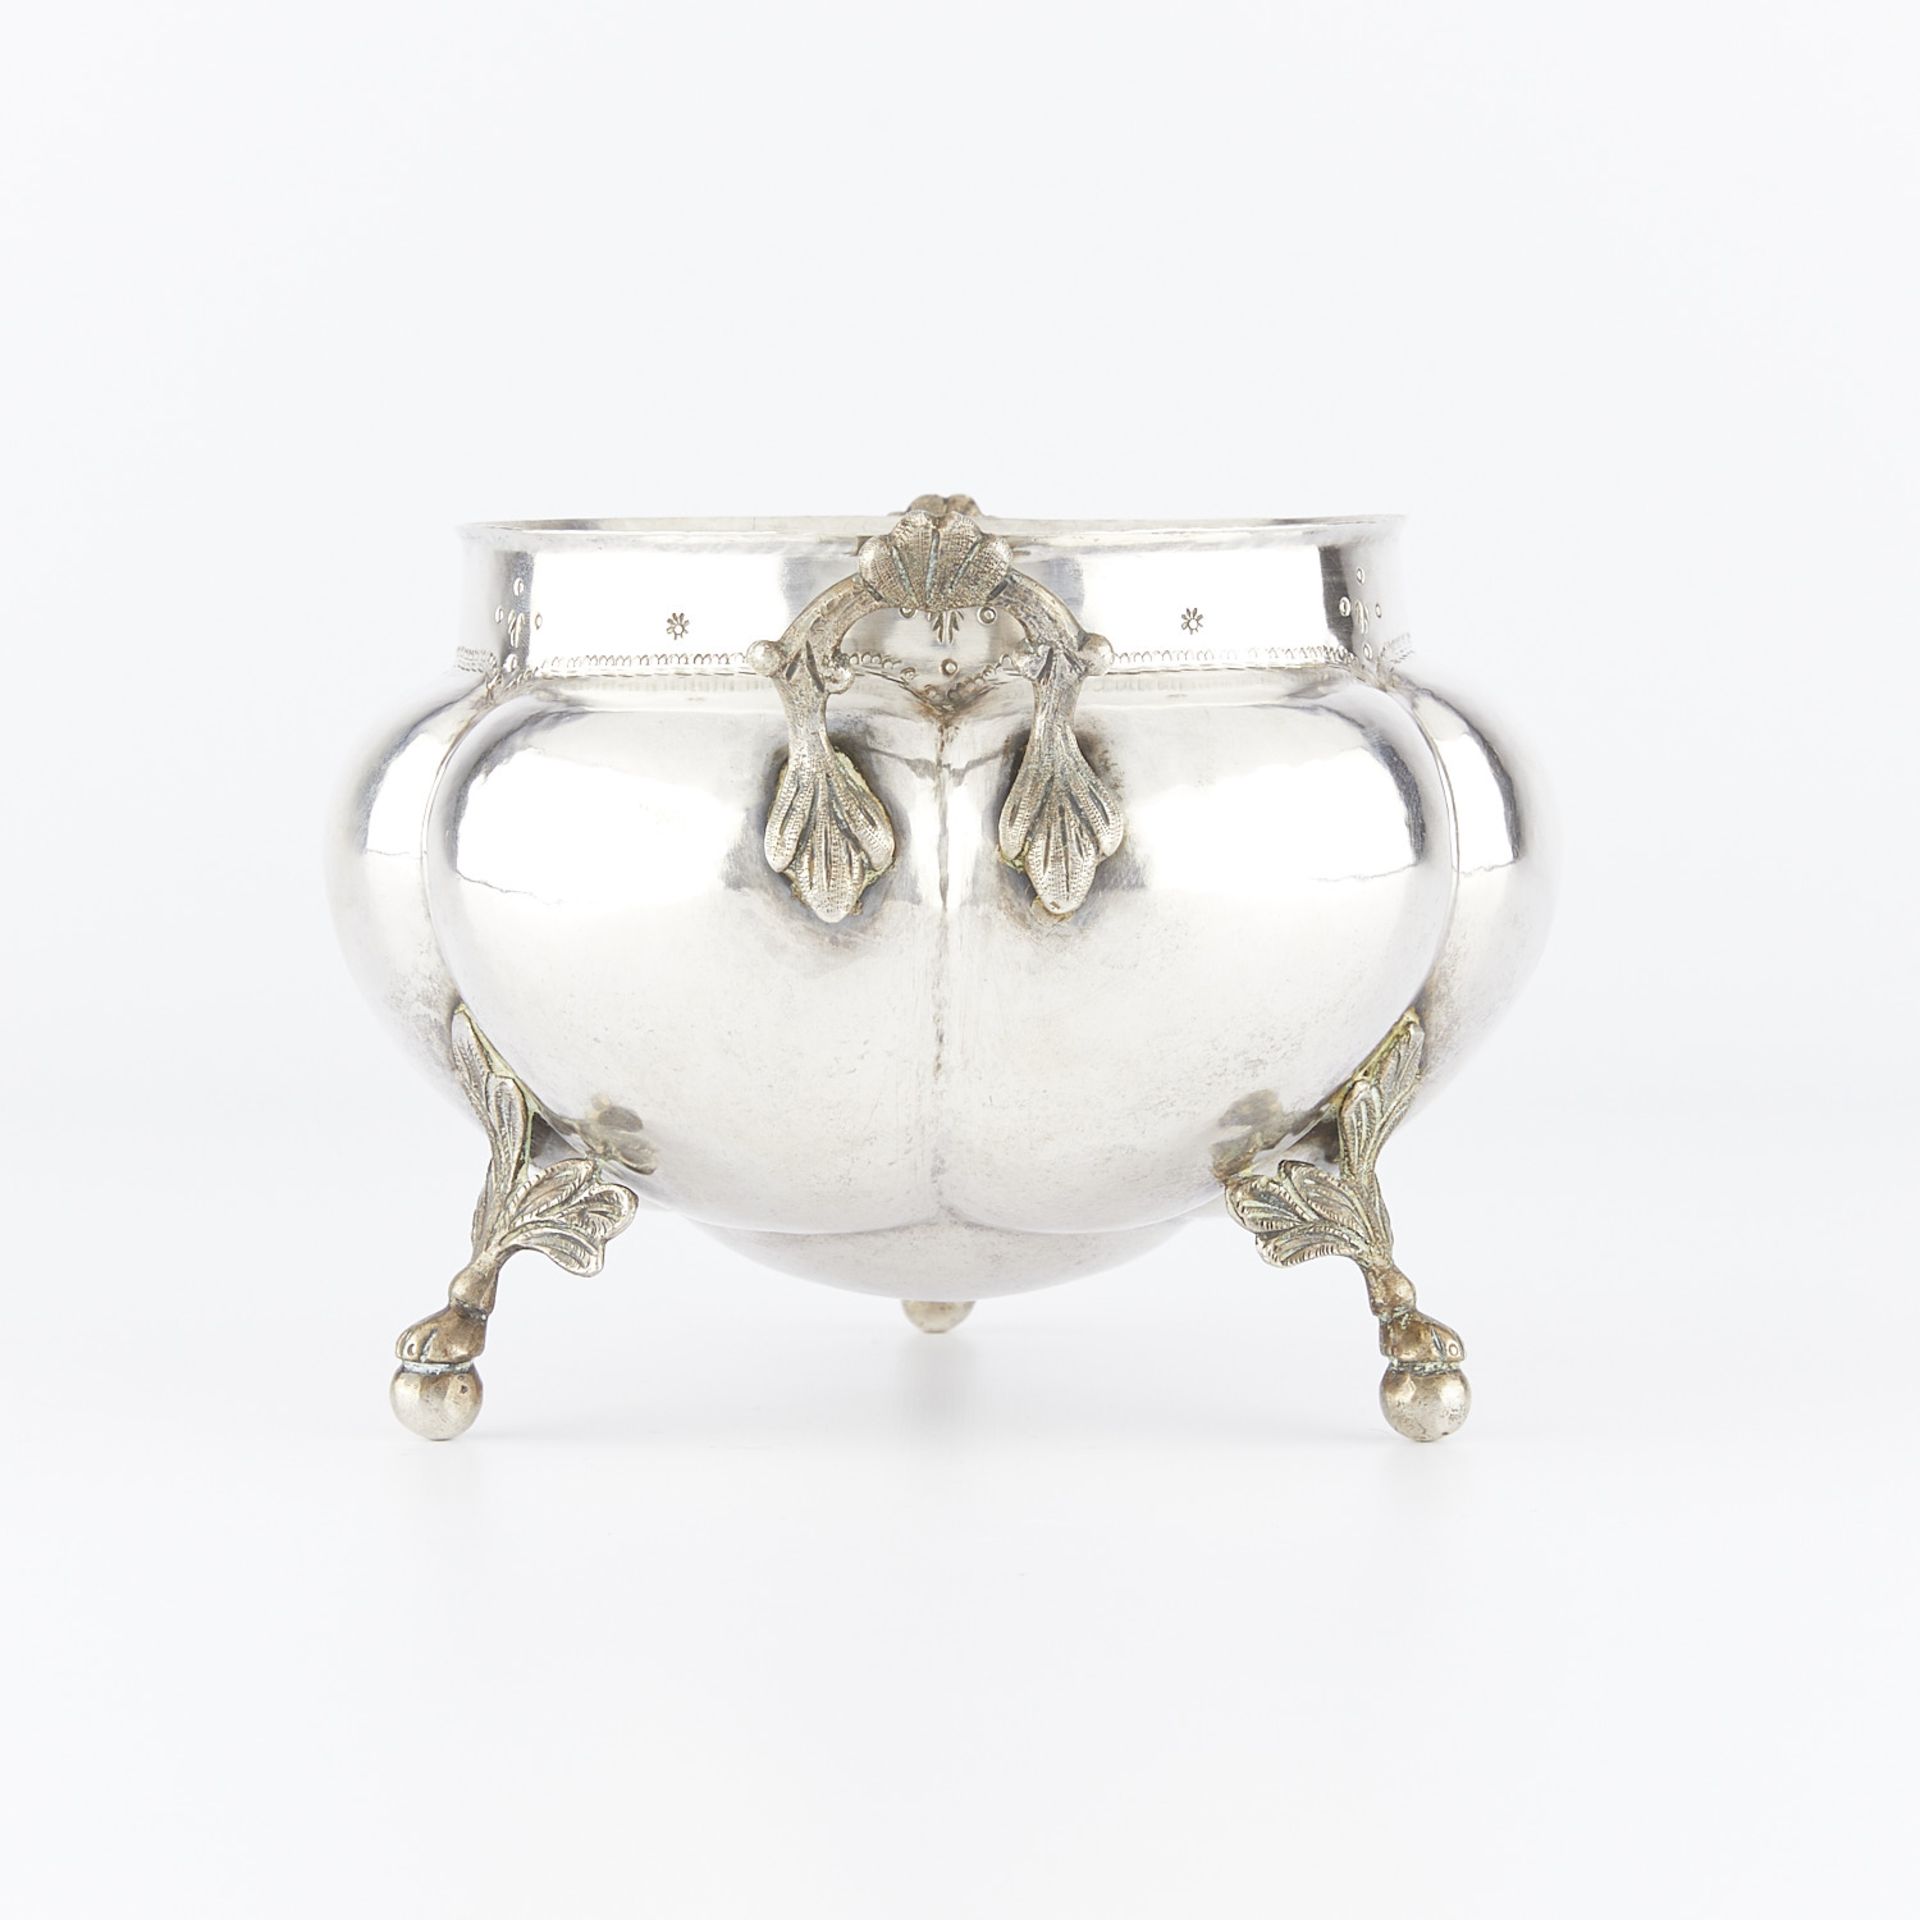 18th/19th c. Antique Silver Lobed Bowl - Image 3 of 9